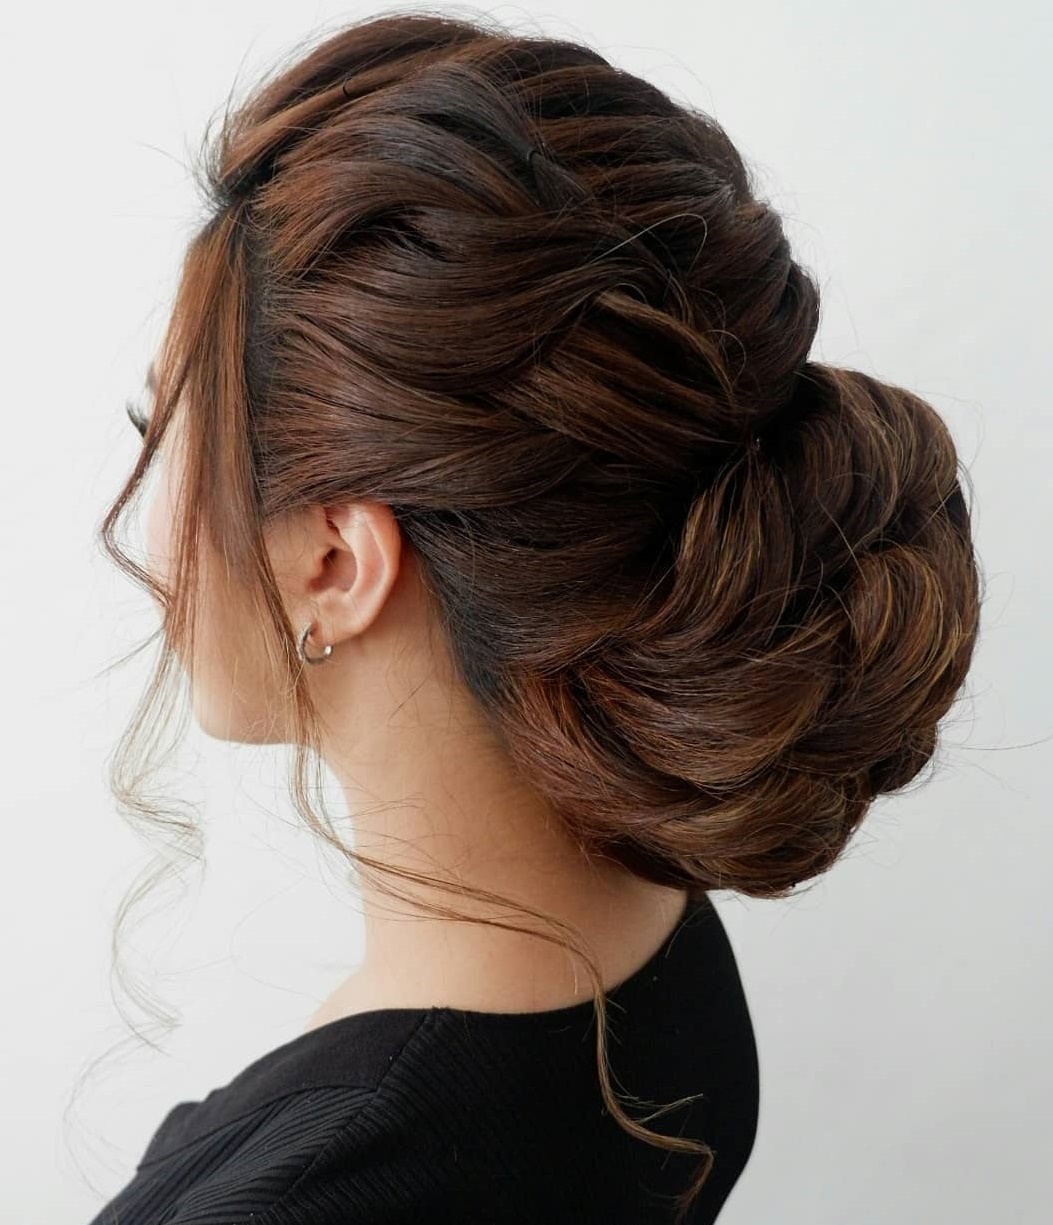 Casual and easy updos you can wear at school or work | All Things Hair PH